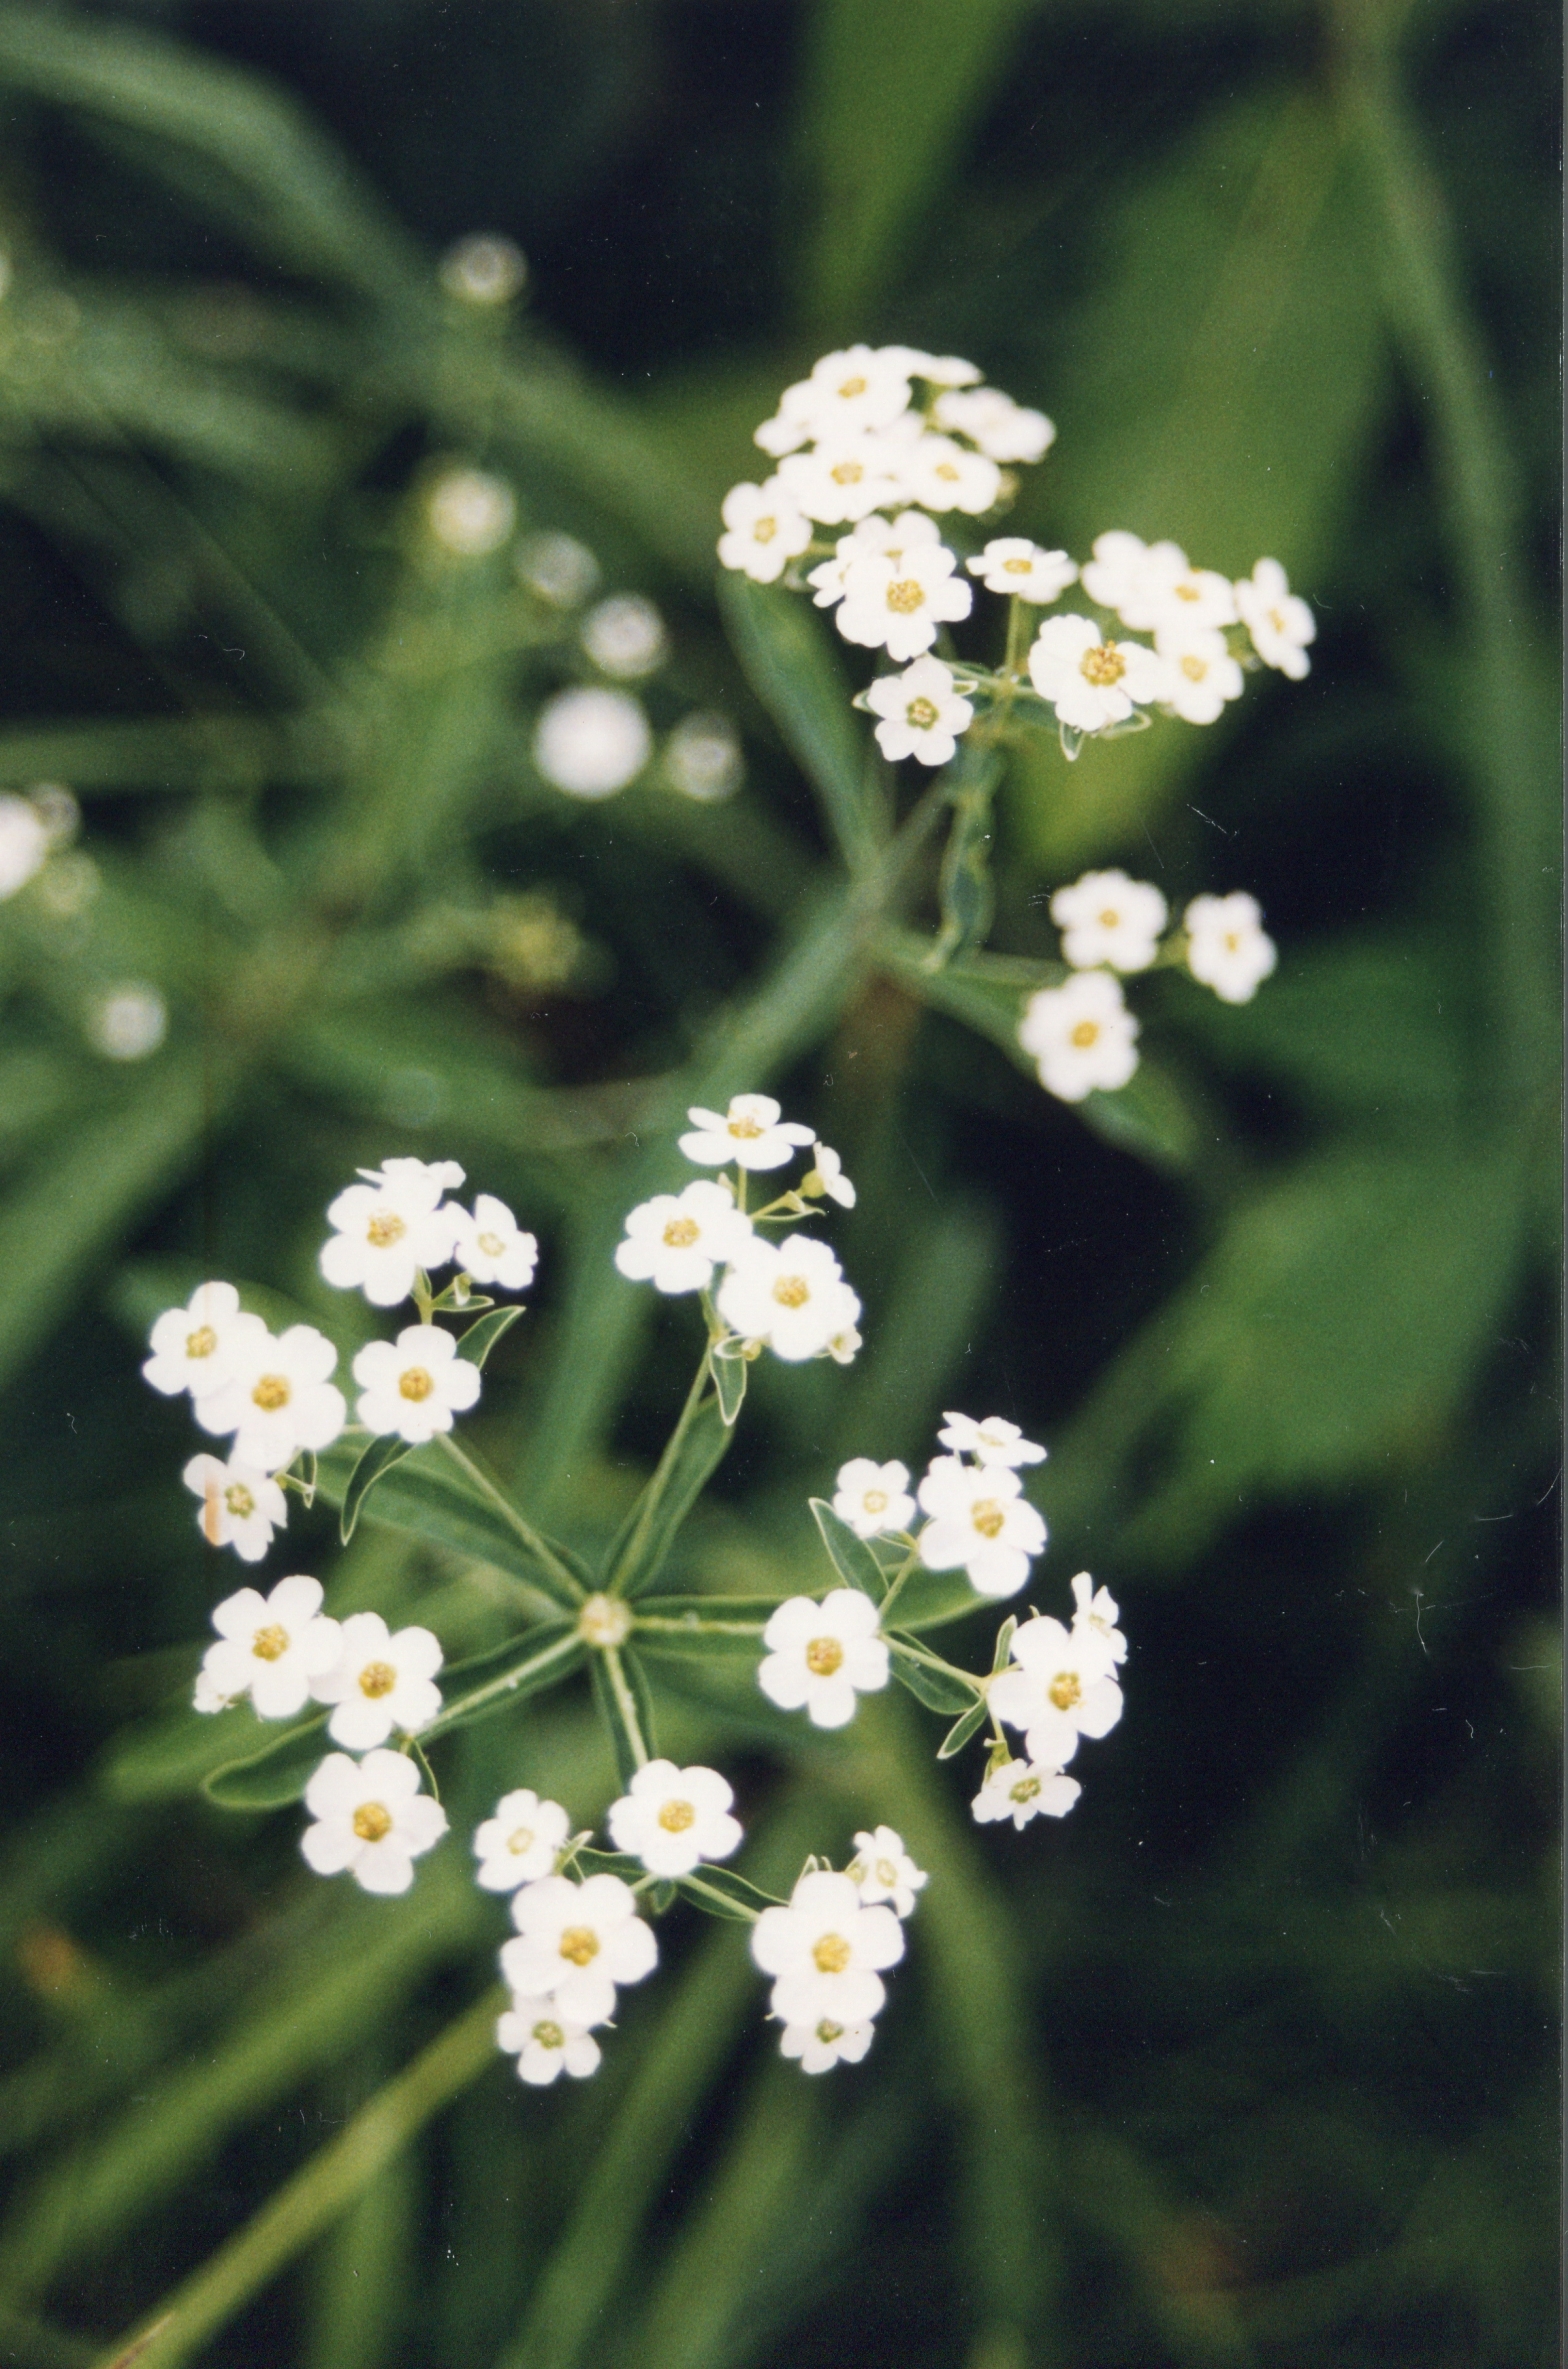 New for 2021: Prairie Baby's Breath – Beaux Arbres Plantes